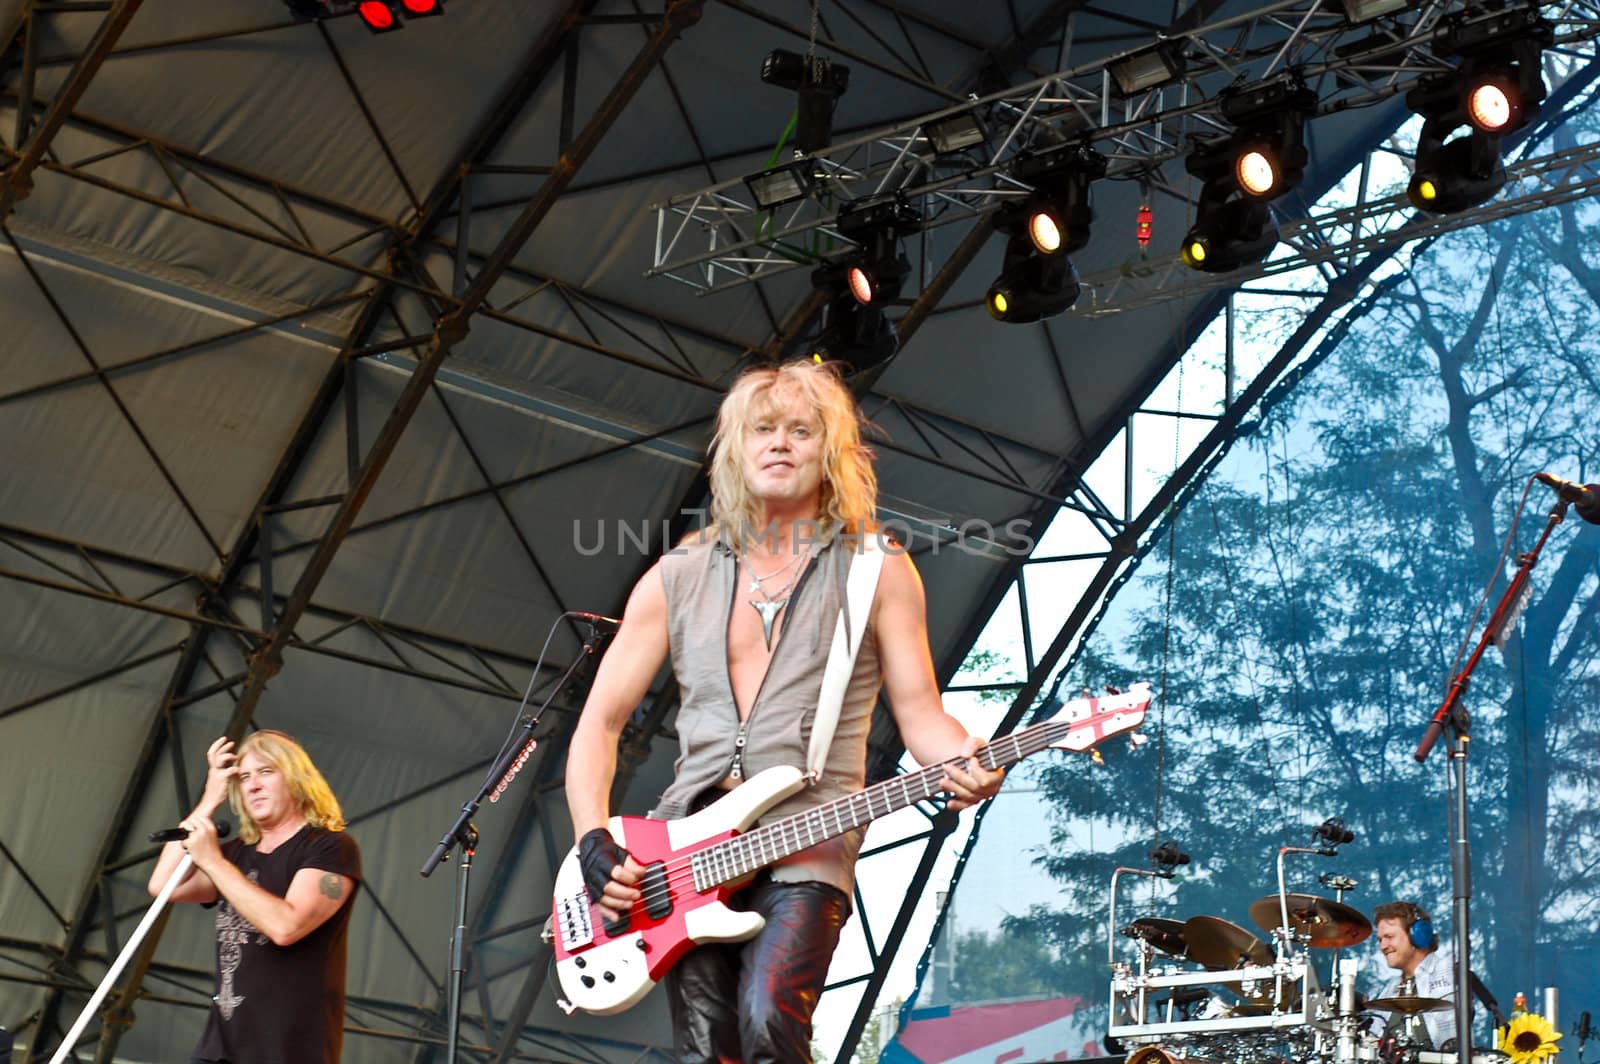  Def Leppard performs at Romexpo July 8, 2008 in Bucharest.